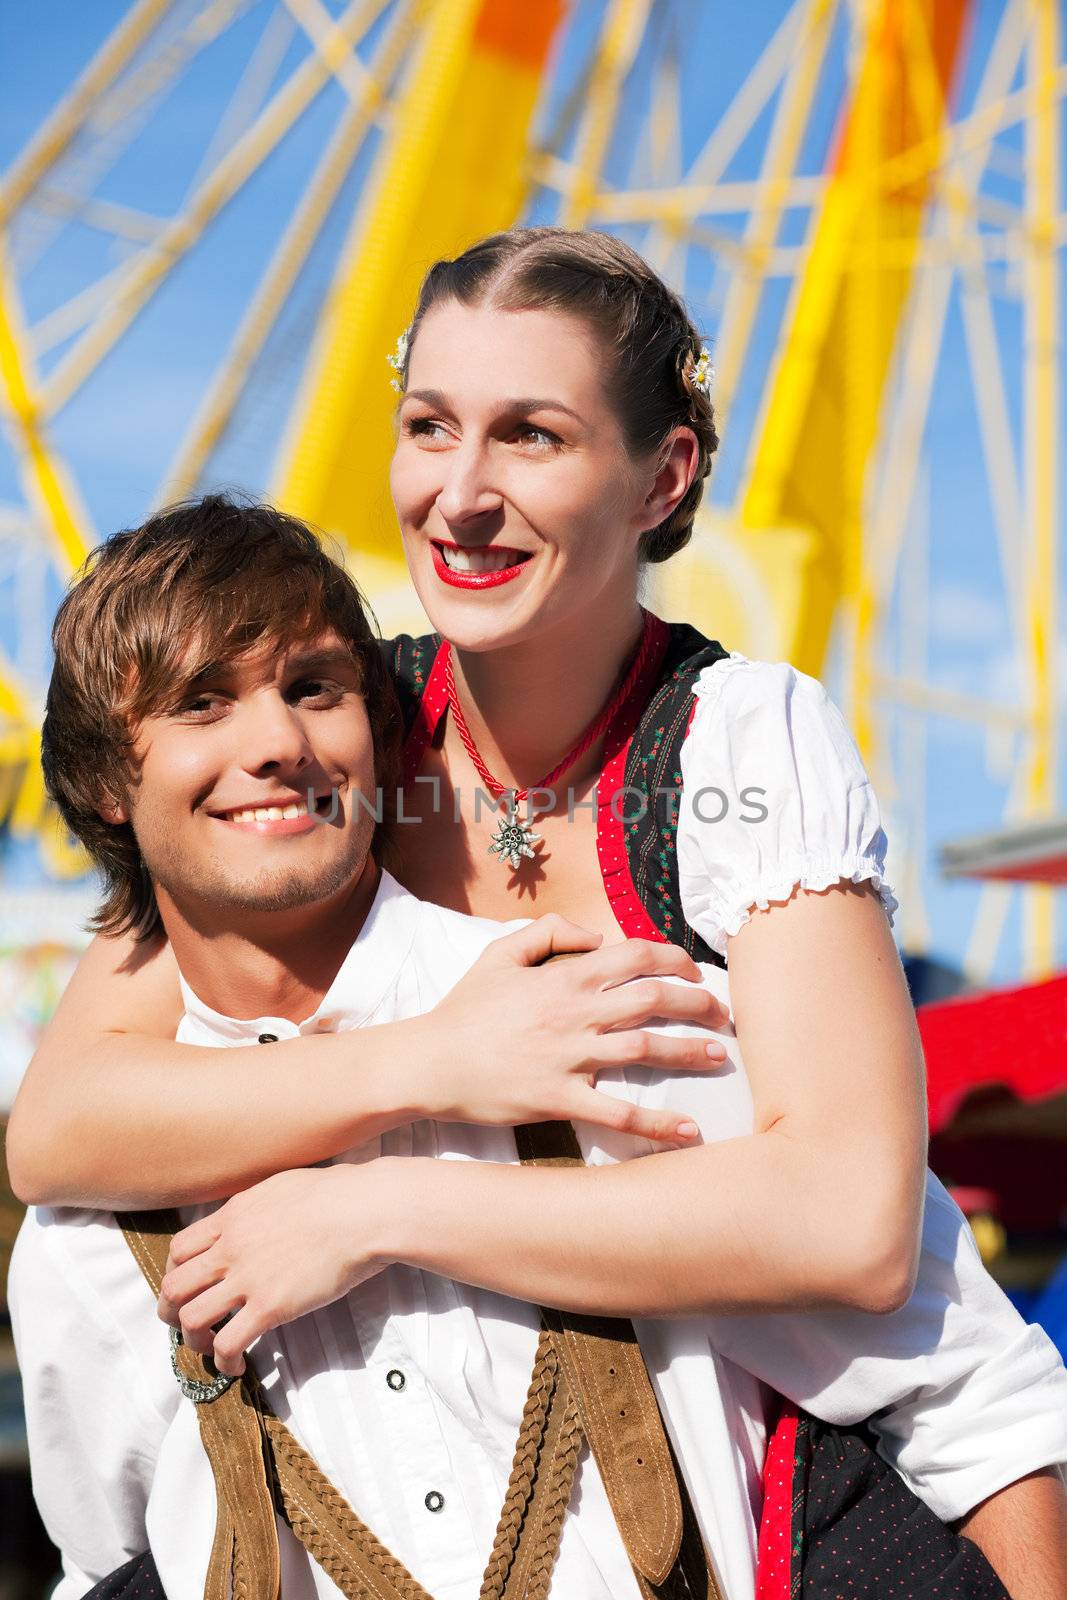 Young and beautiful couple in traditional Bavarian Tracht - Dirndl and Lederhosen - embracing each other on a fair like a Dult or the Oktoberfest; both are standing in front of a typical booth